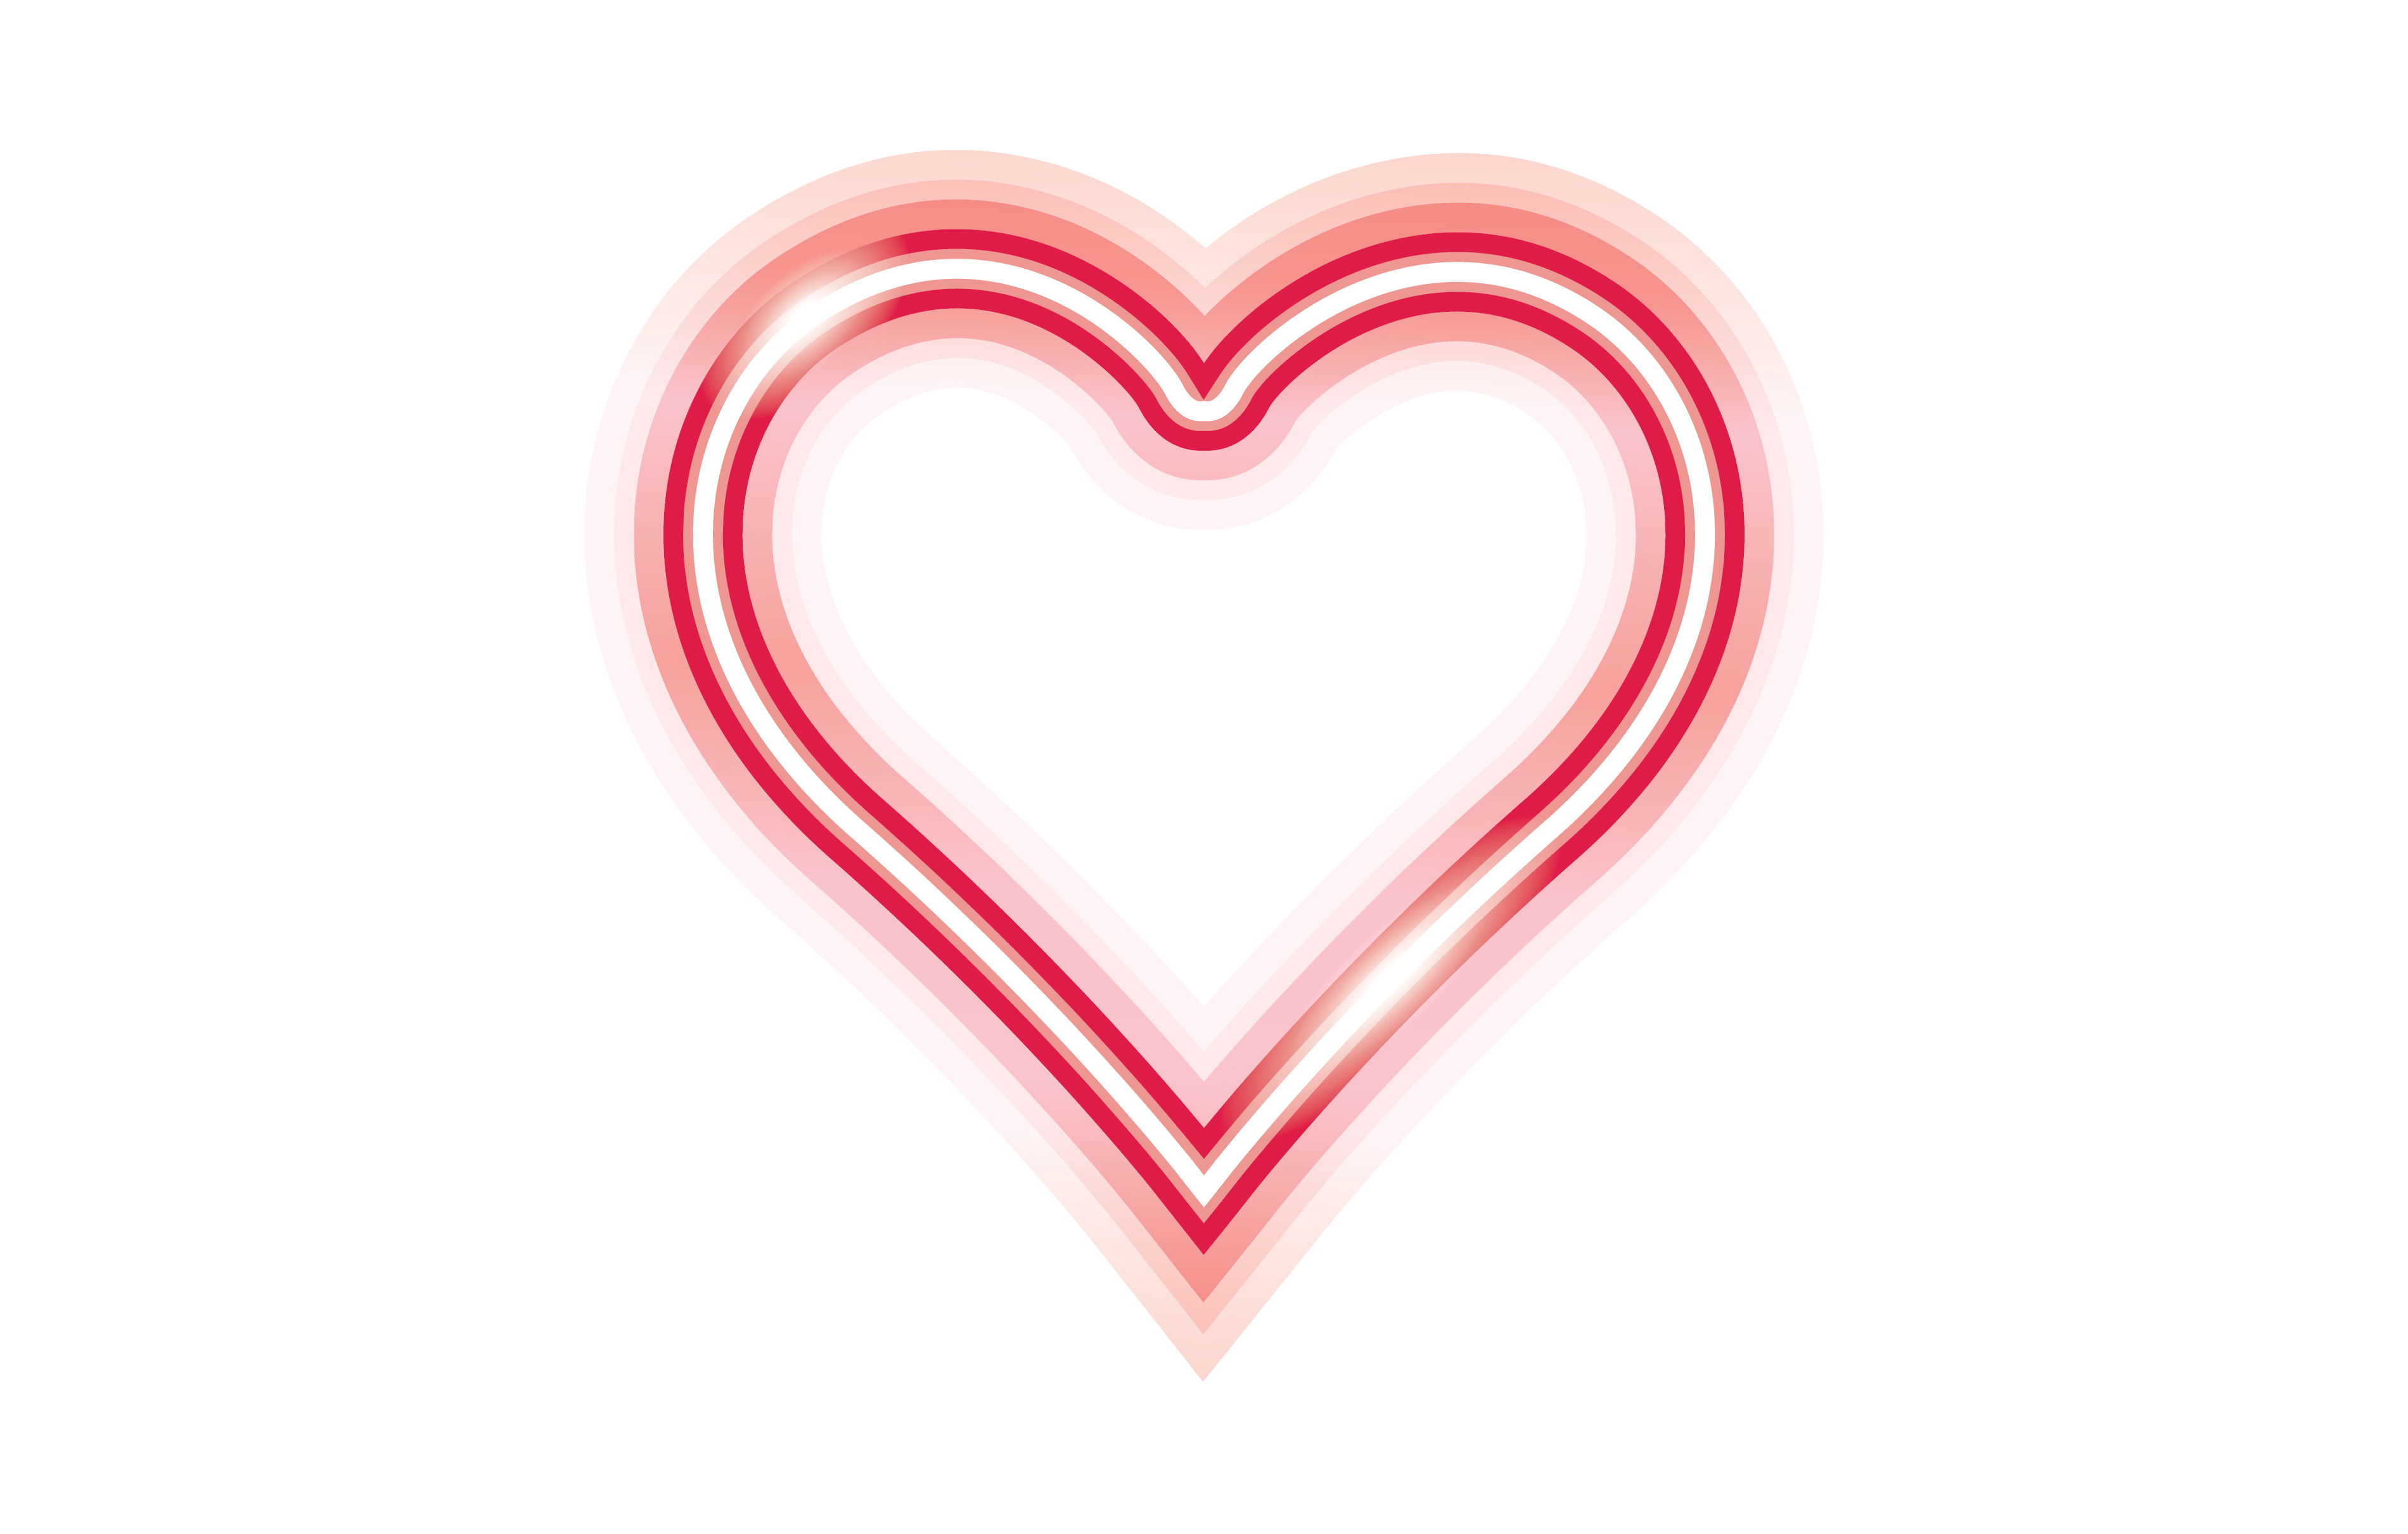 Glowing red heart on white background